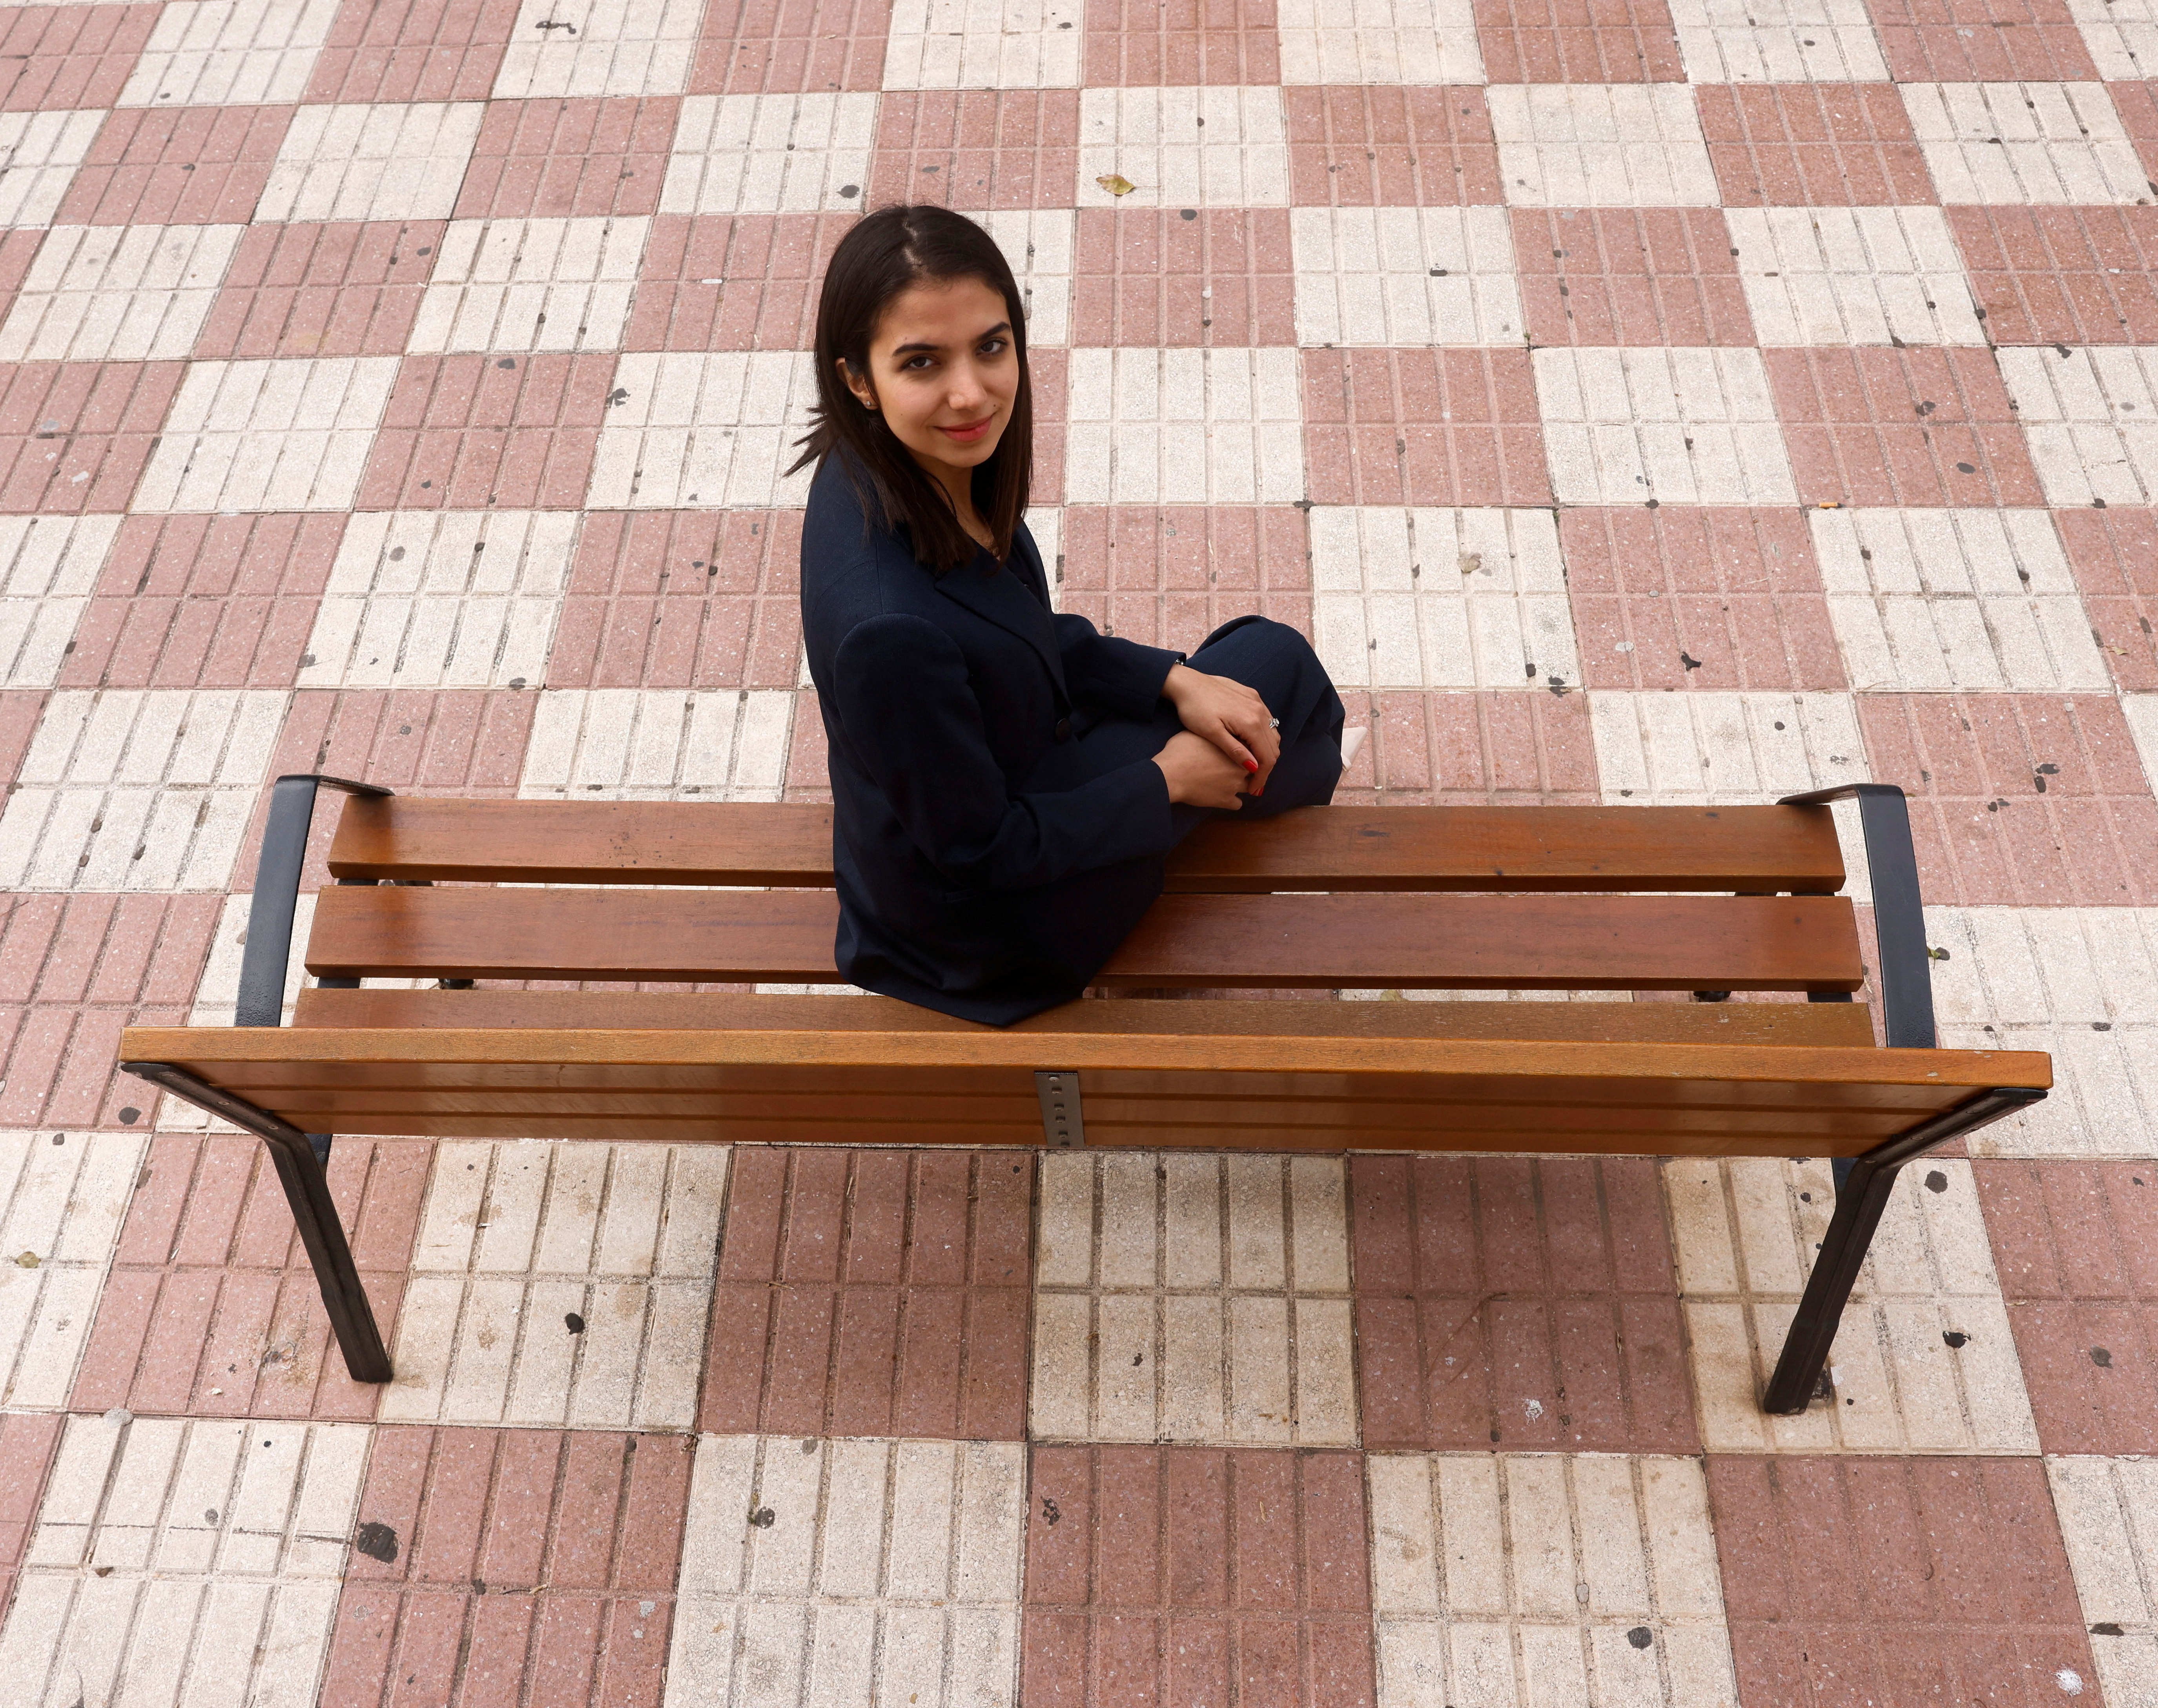 Exiled Iranian chess player says not herself with hijab